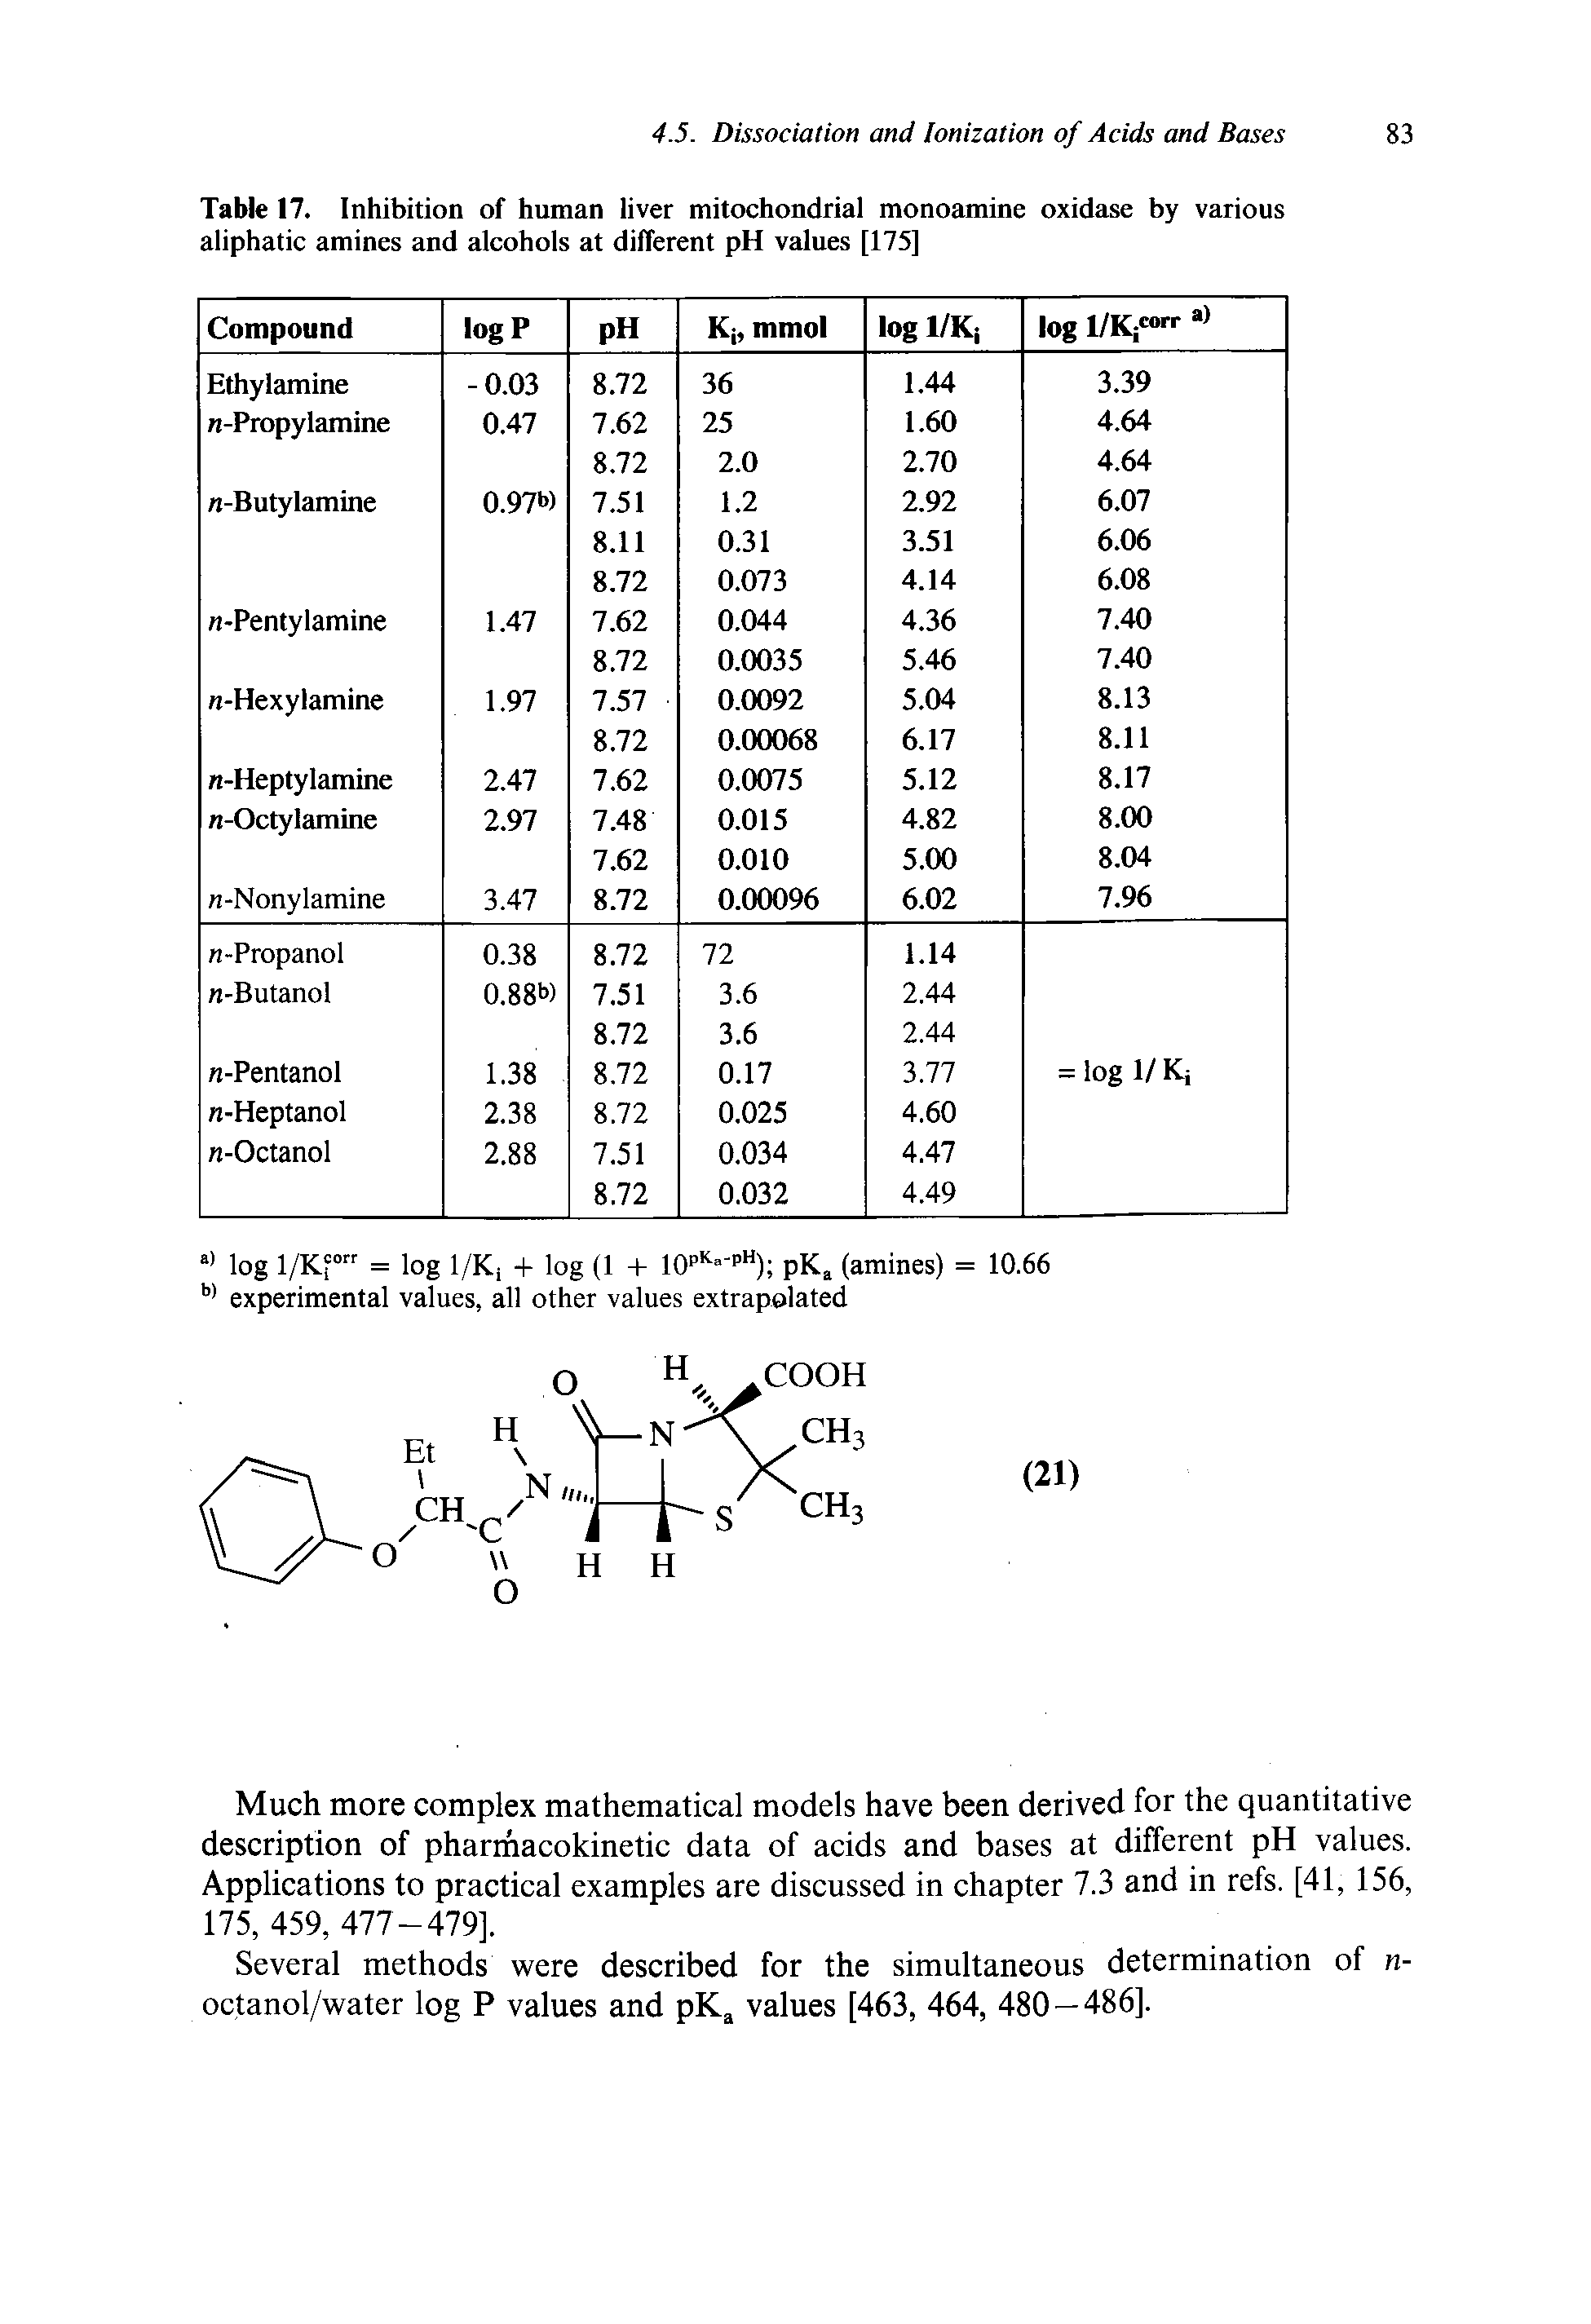 Table 17. Inhibition of human liver mitochondrial monoamine oxidase by various aliphatic amines and alcohols at different pH values [175]...